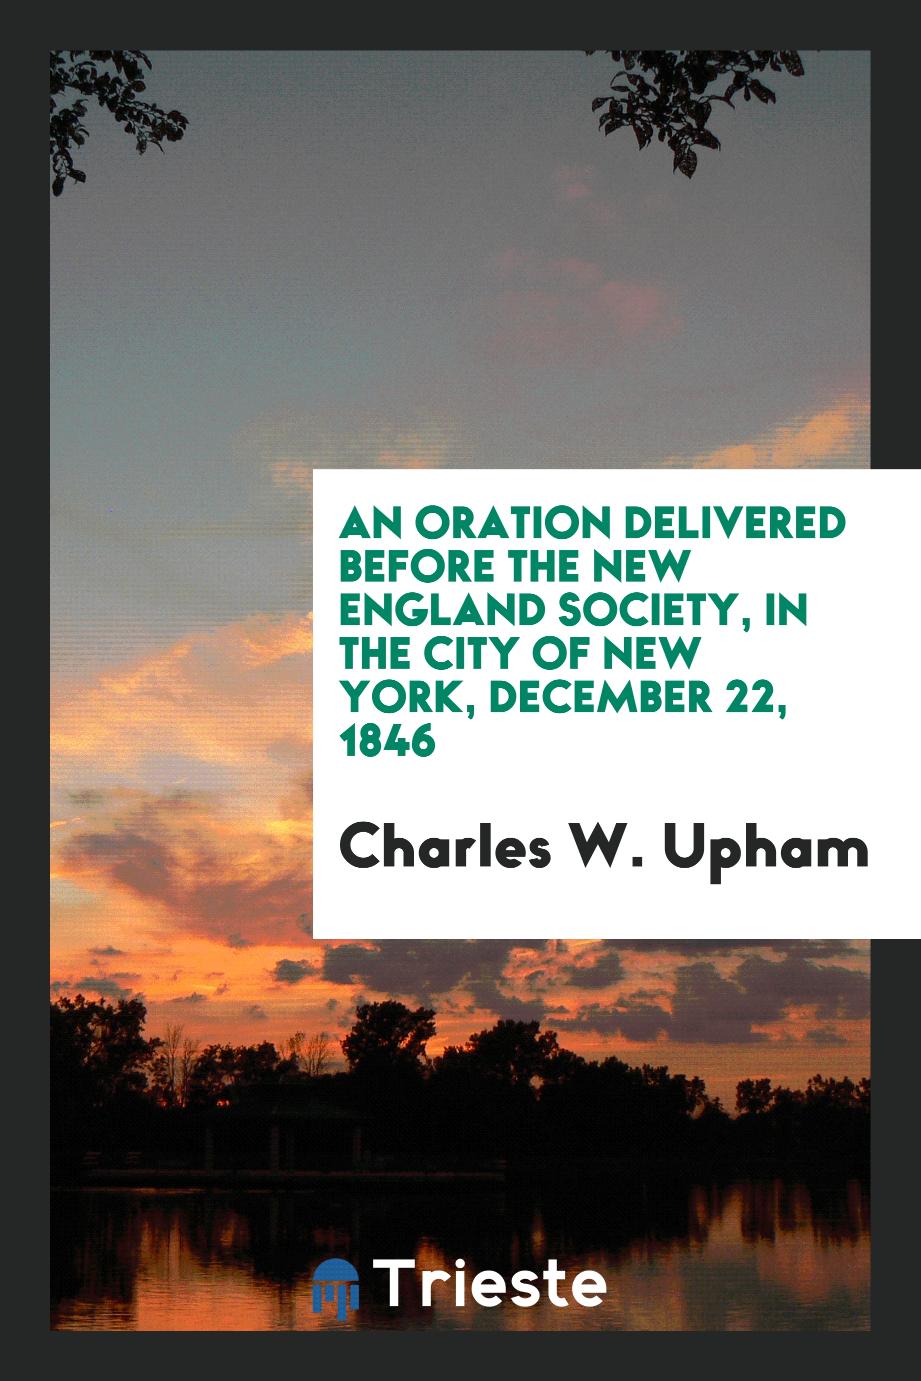 An Oration Delivered Before the New England Society, in the City of New York, December 22, 1846